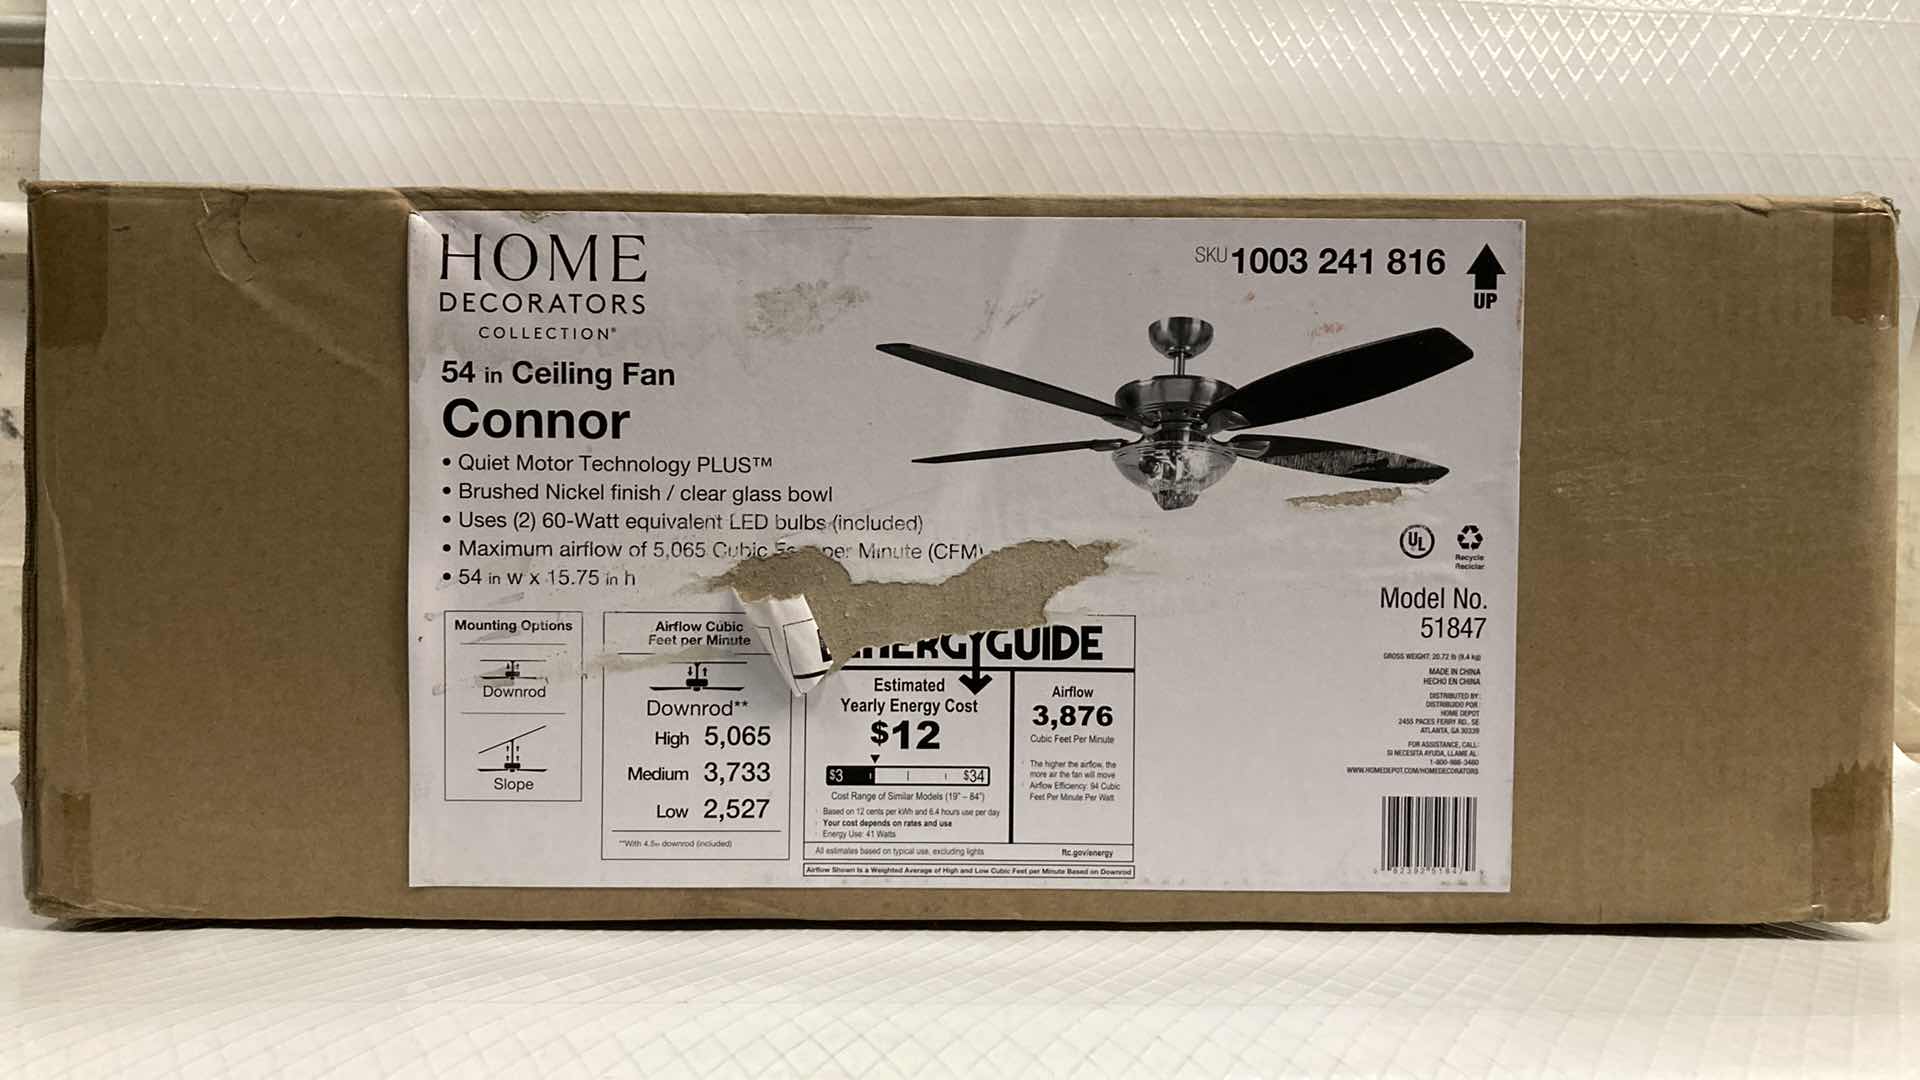 Photo 1 of HOME DECORATORS CONNOR BRUSHED NICKEL FINISH 54” CEILING FAN MODEL 51847